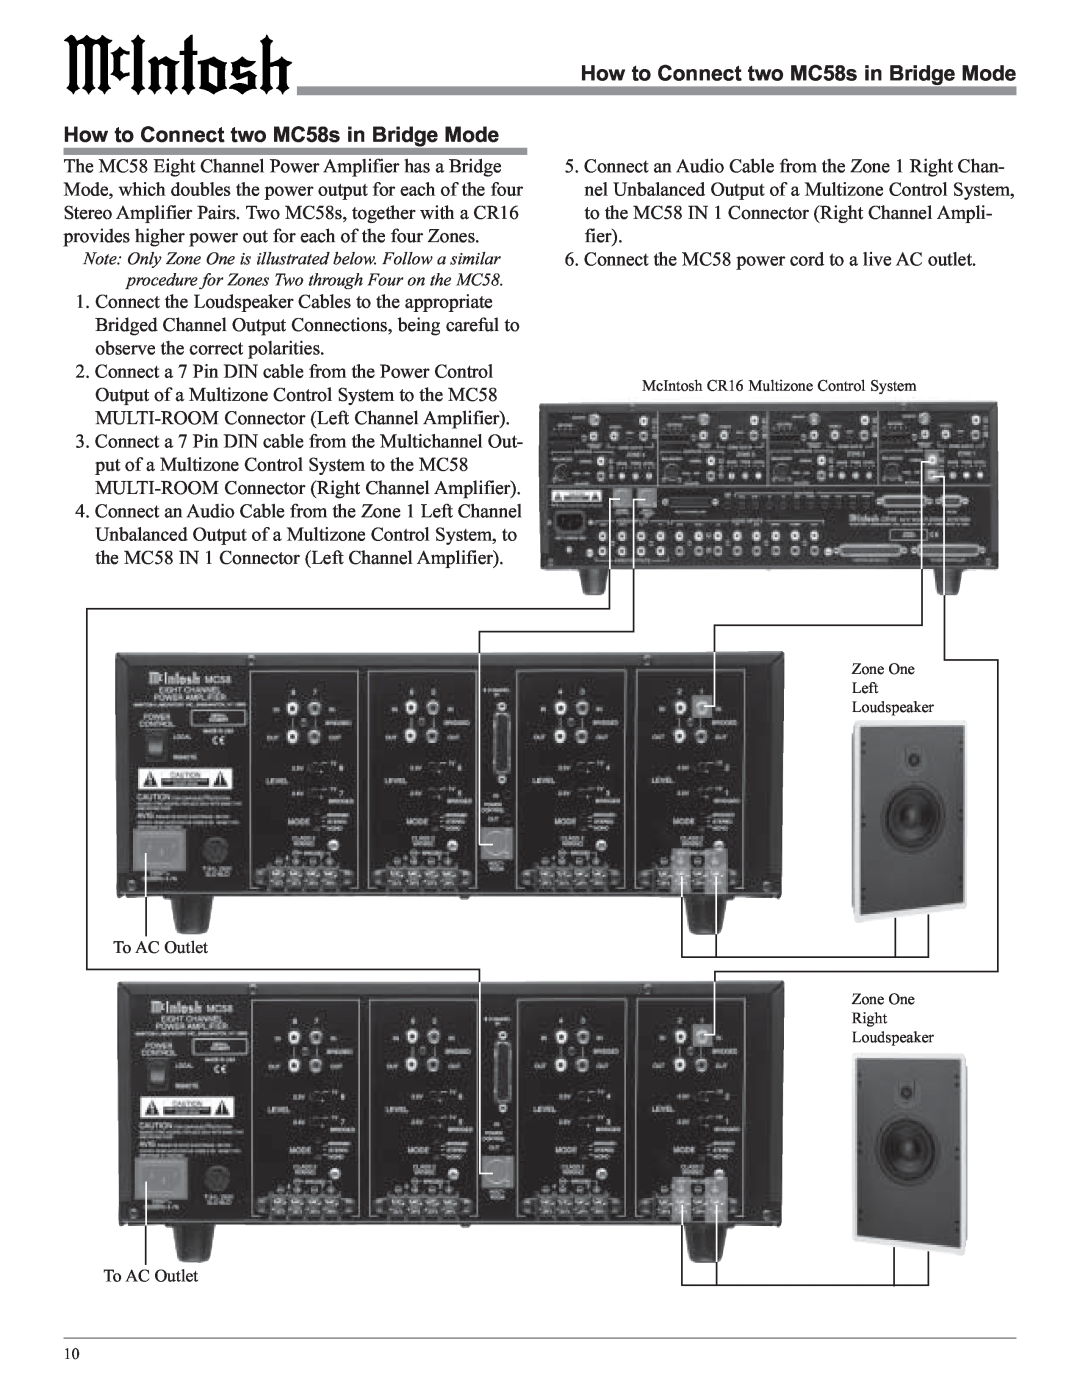 McIntosh owner manual How to Connect two MC58s in Bridge Mode 